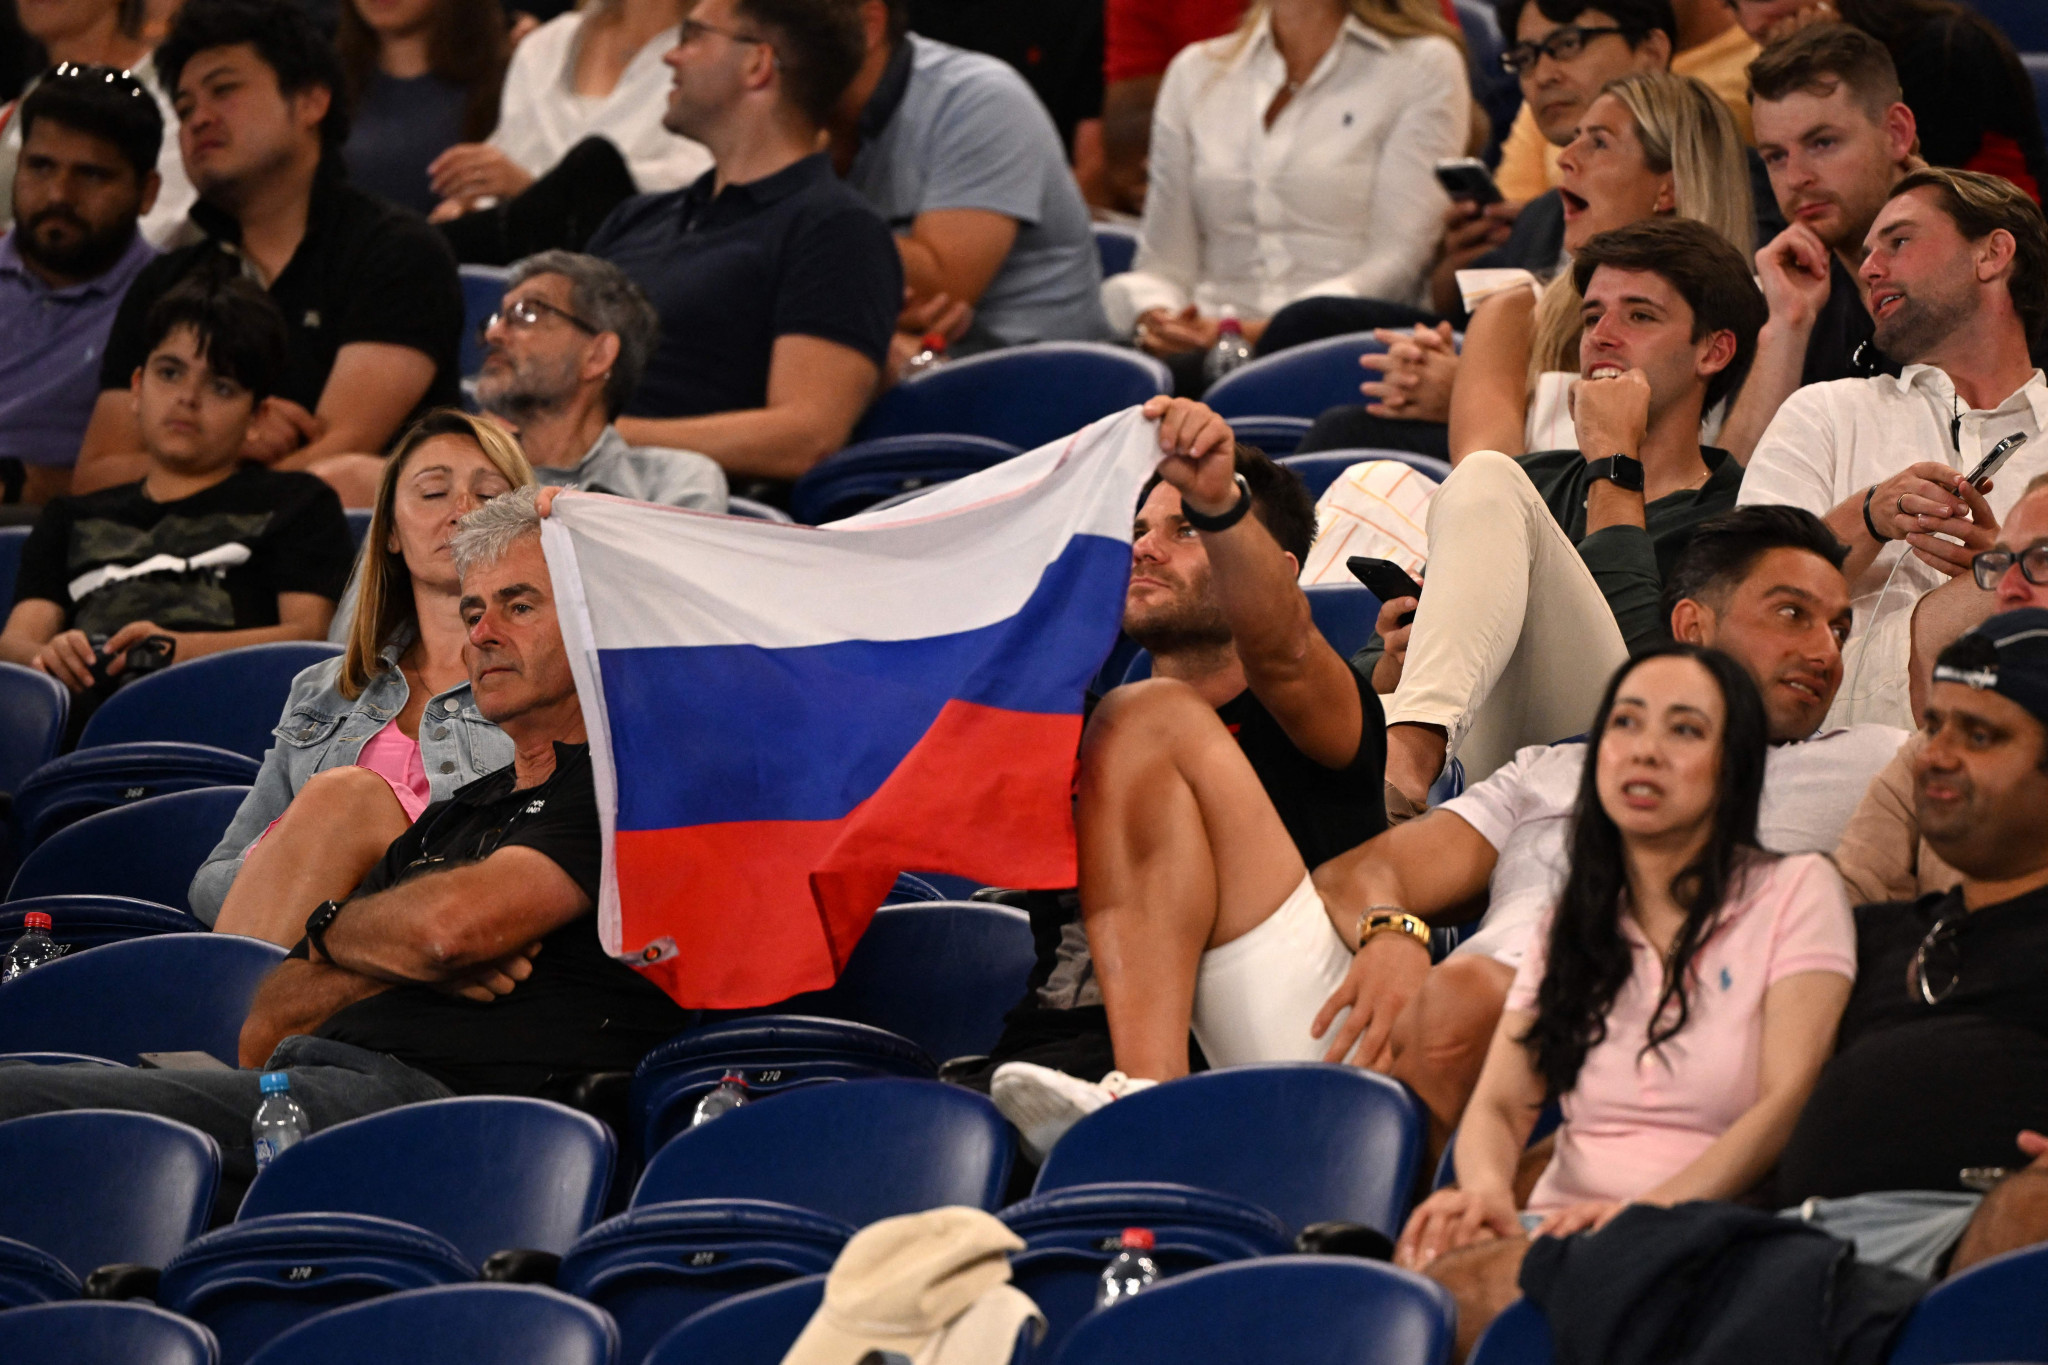 Supporters hold a Russian flag during Daniil Medvedev's first-round match at the Australian Open ©Getty Images